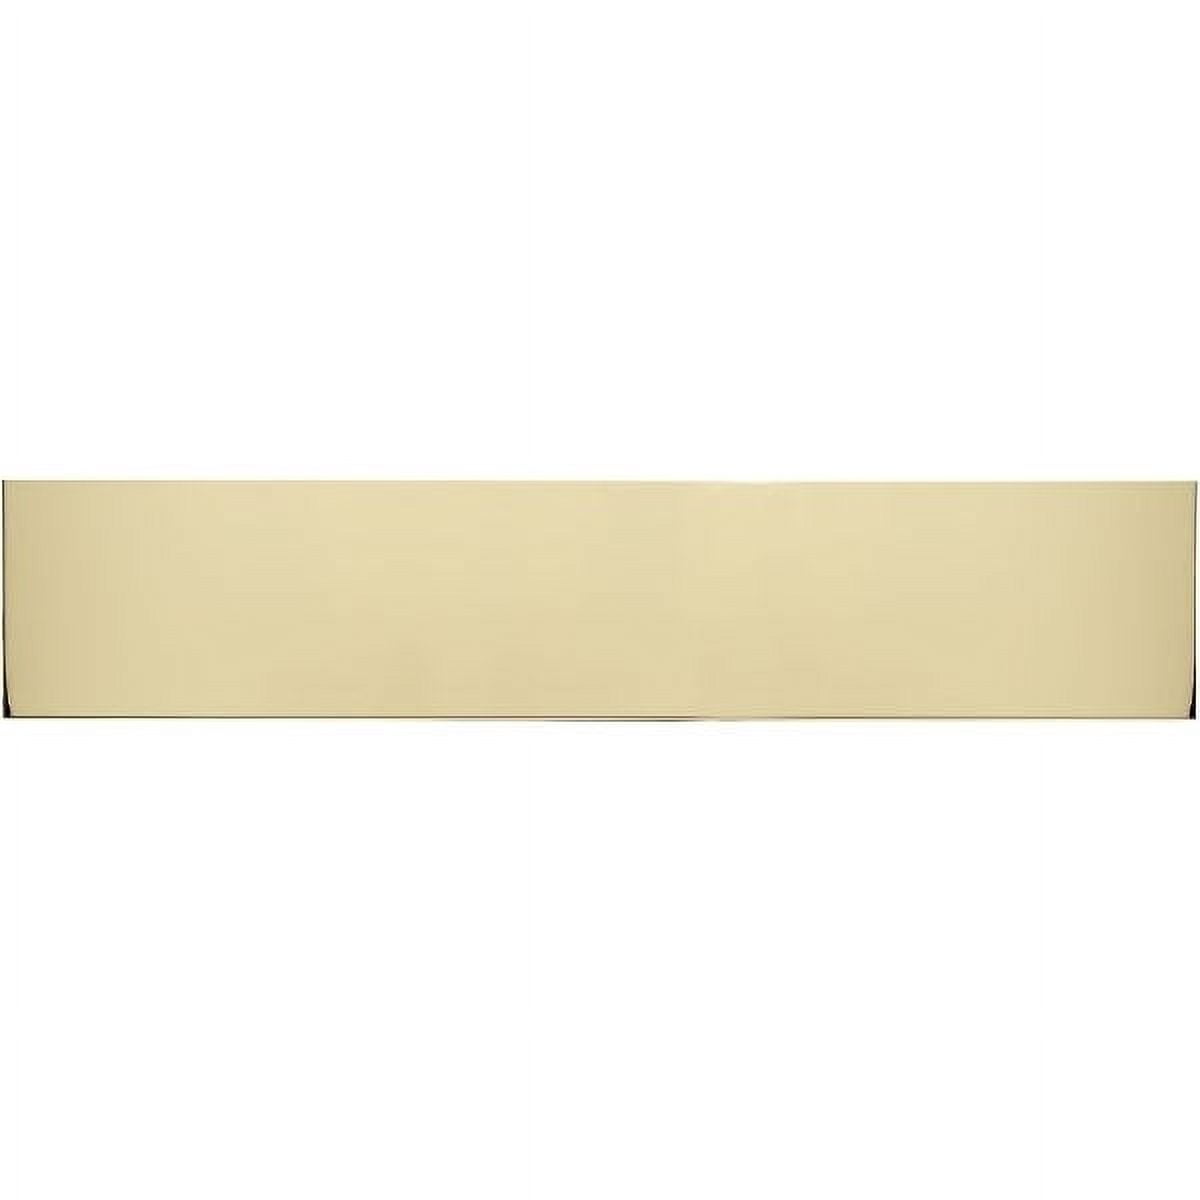 A09-p0830-628adh 8 X 30 In. Polished Brass-aluminum Adhesive Mount Kick Plate